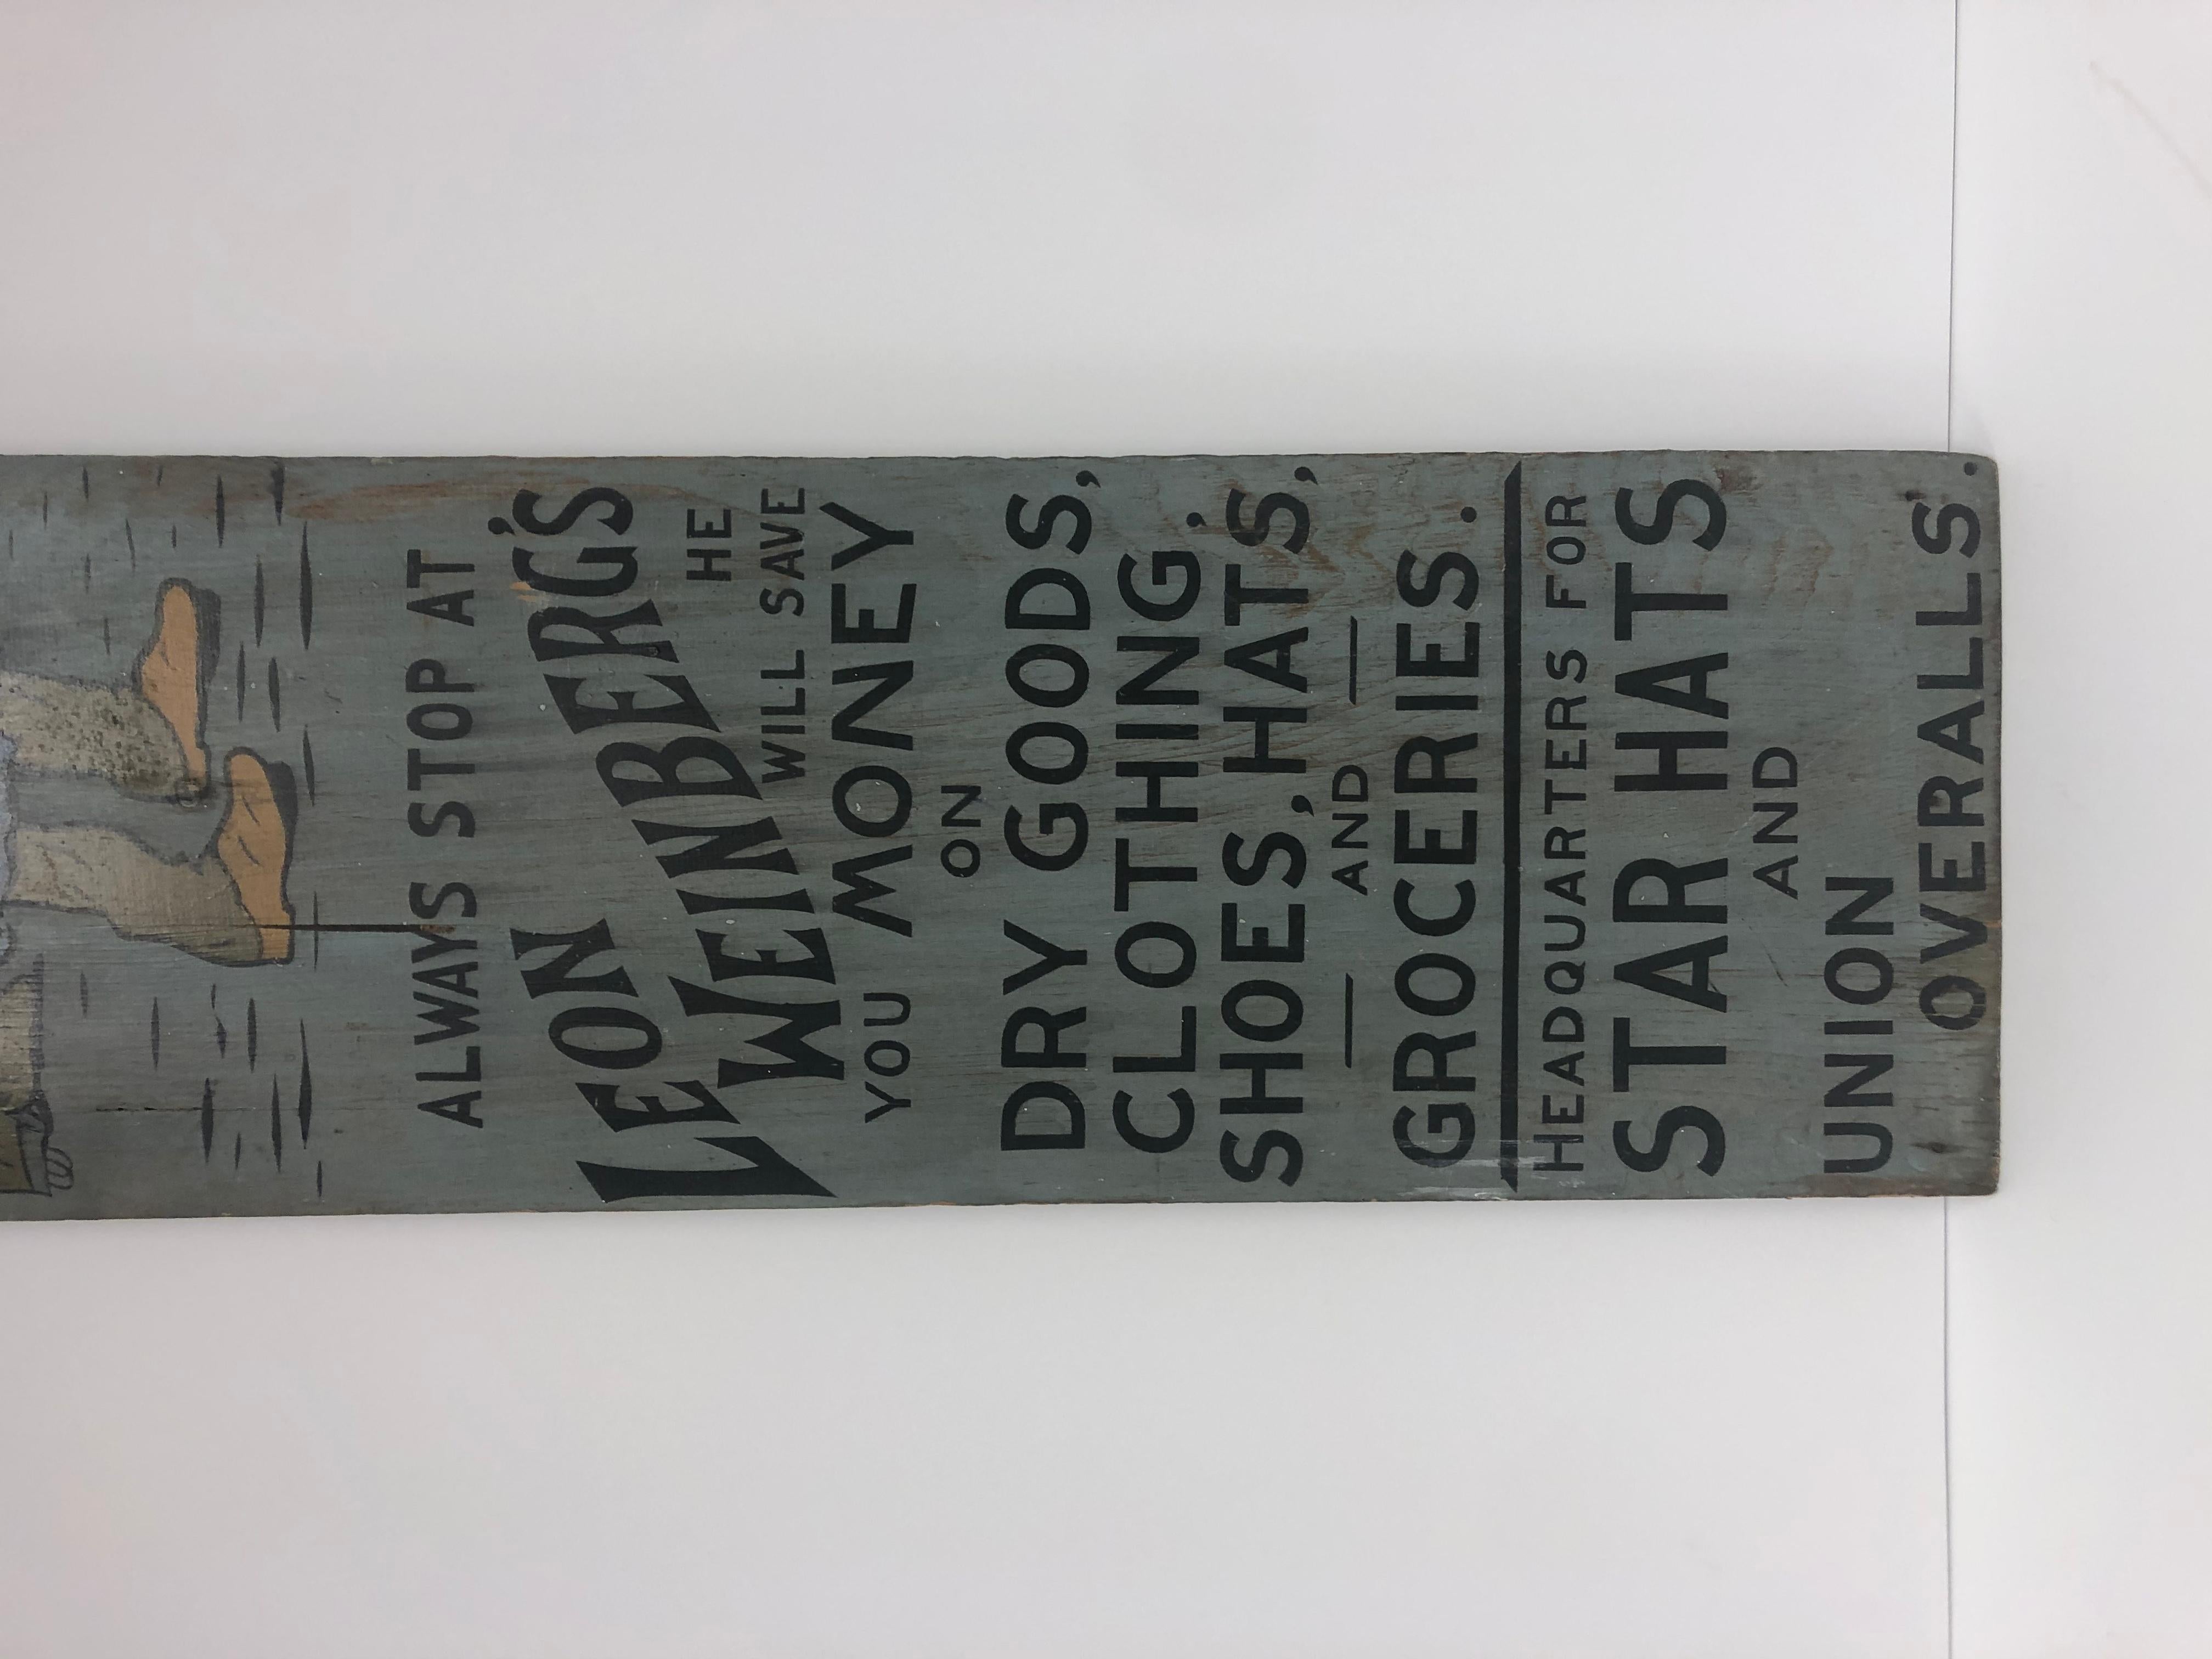 North American Early 20th Century Advertising Sign by Ithaca Sign Works